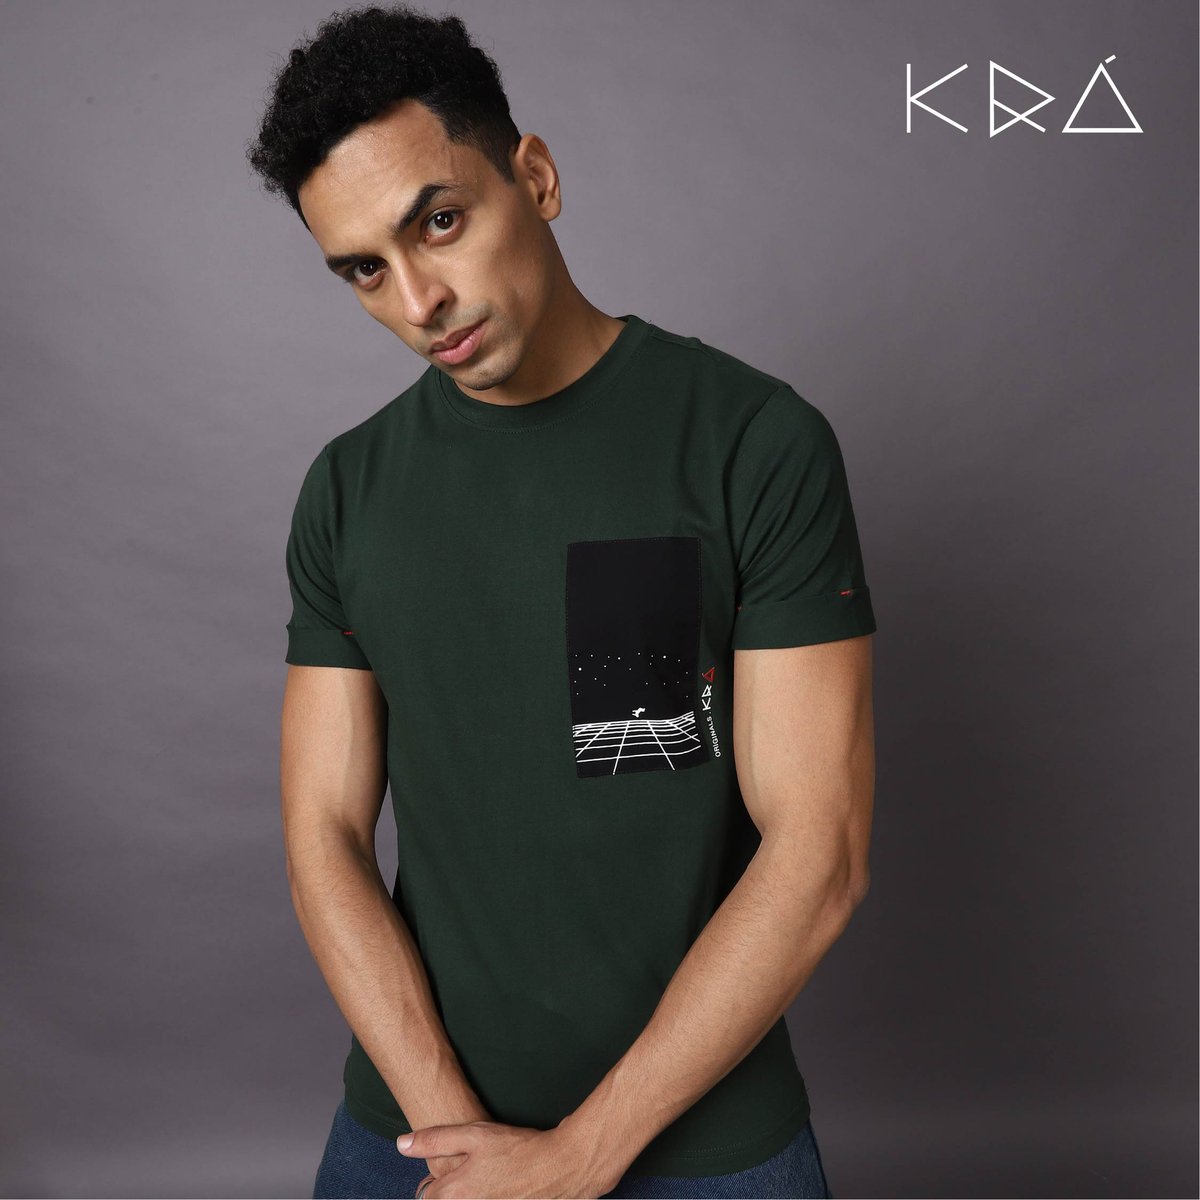 Doing something outdoorsy? We’ve got the perfect tee for you. It’s comfy, cool and in forest green! Head to the link in bio to make it yours stat.
.
.
.
.
#YouDoYou #KraLife #Streetwear #urbanwear #streetculture #streetapparel #streetapparel #greentee #Indianstreetwear #Greentee